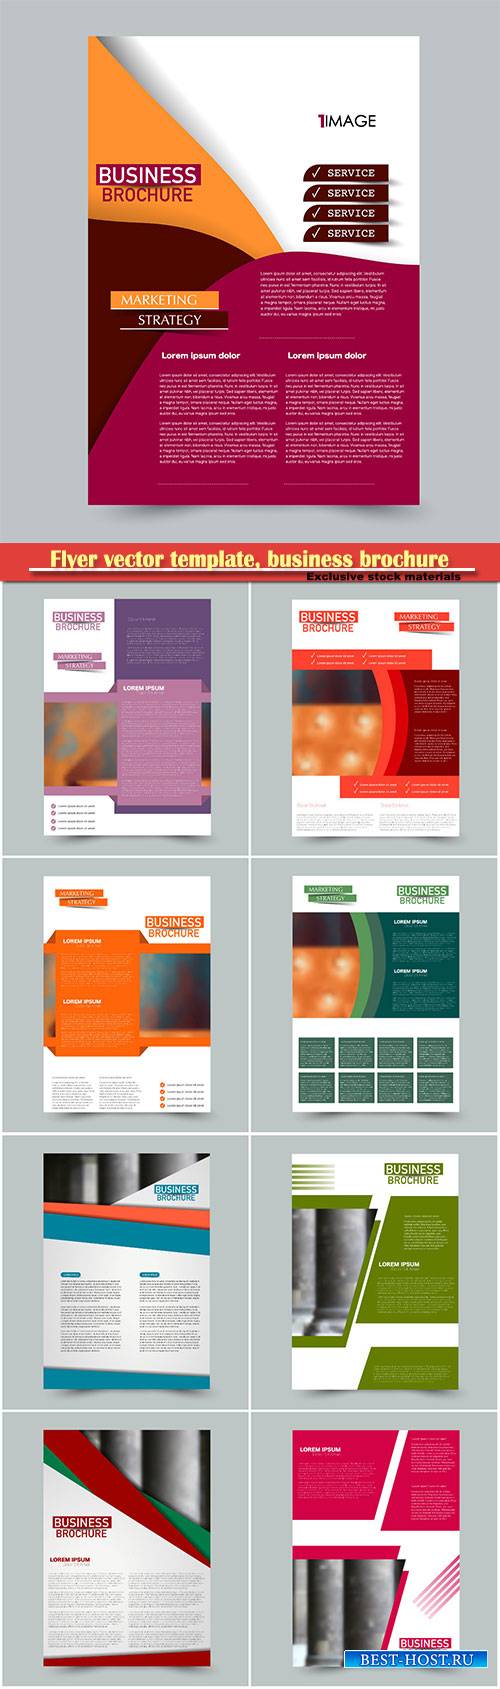 Flyer vector template, business brochure, magazine cover # 14